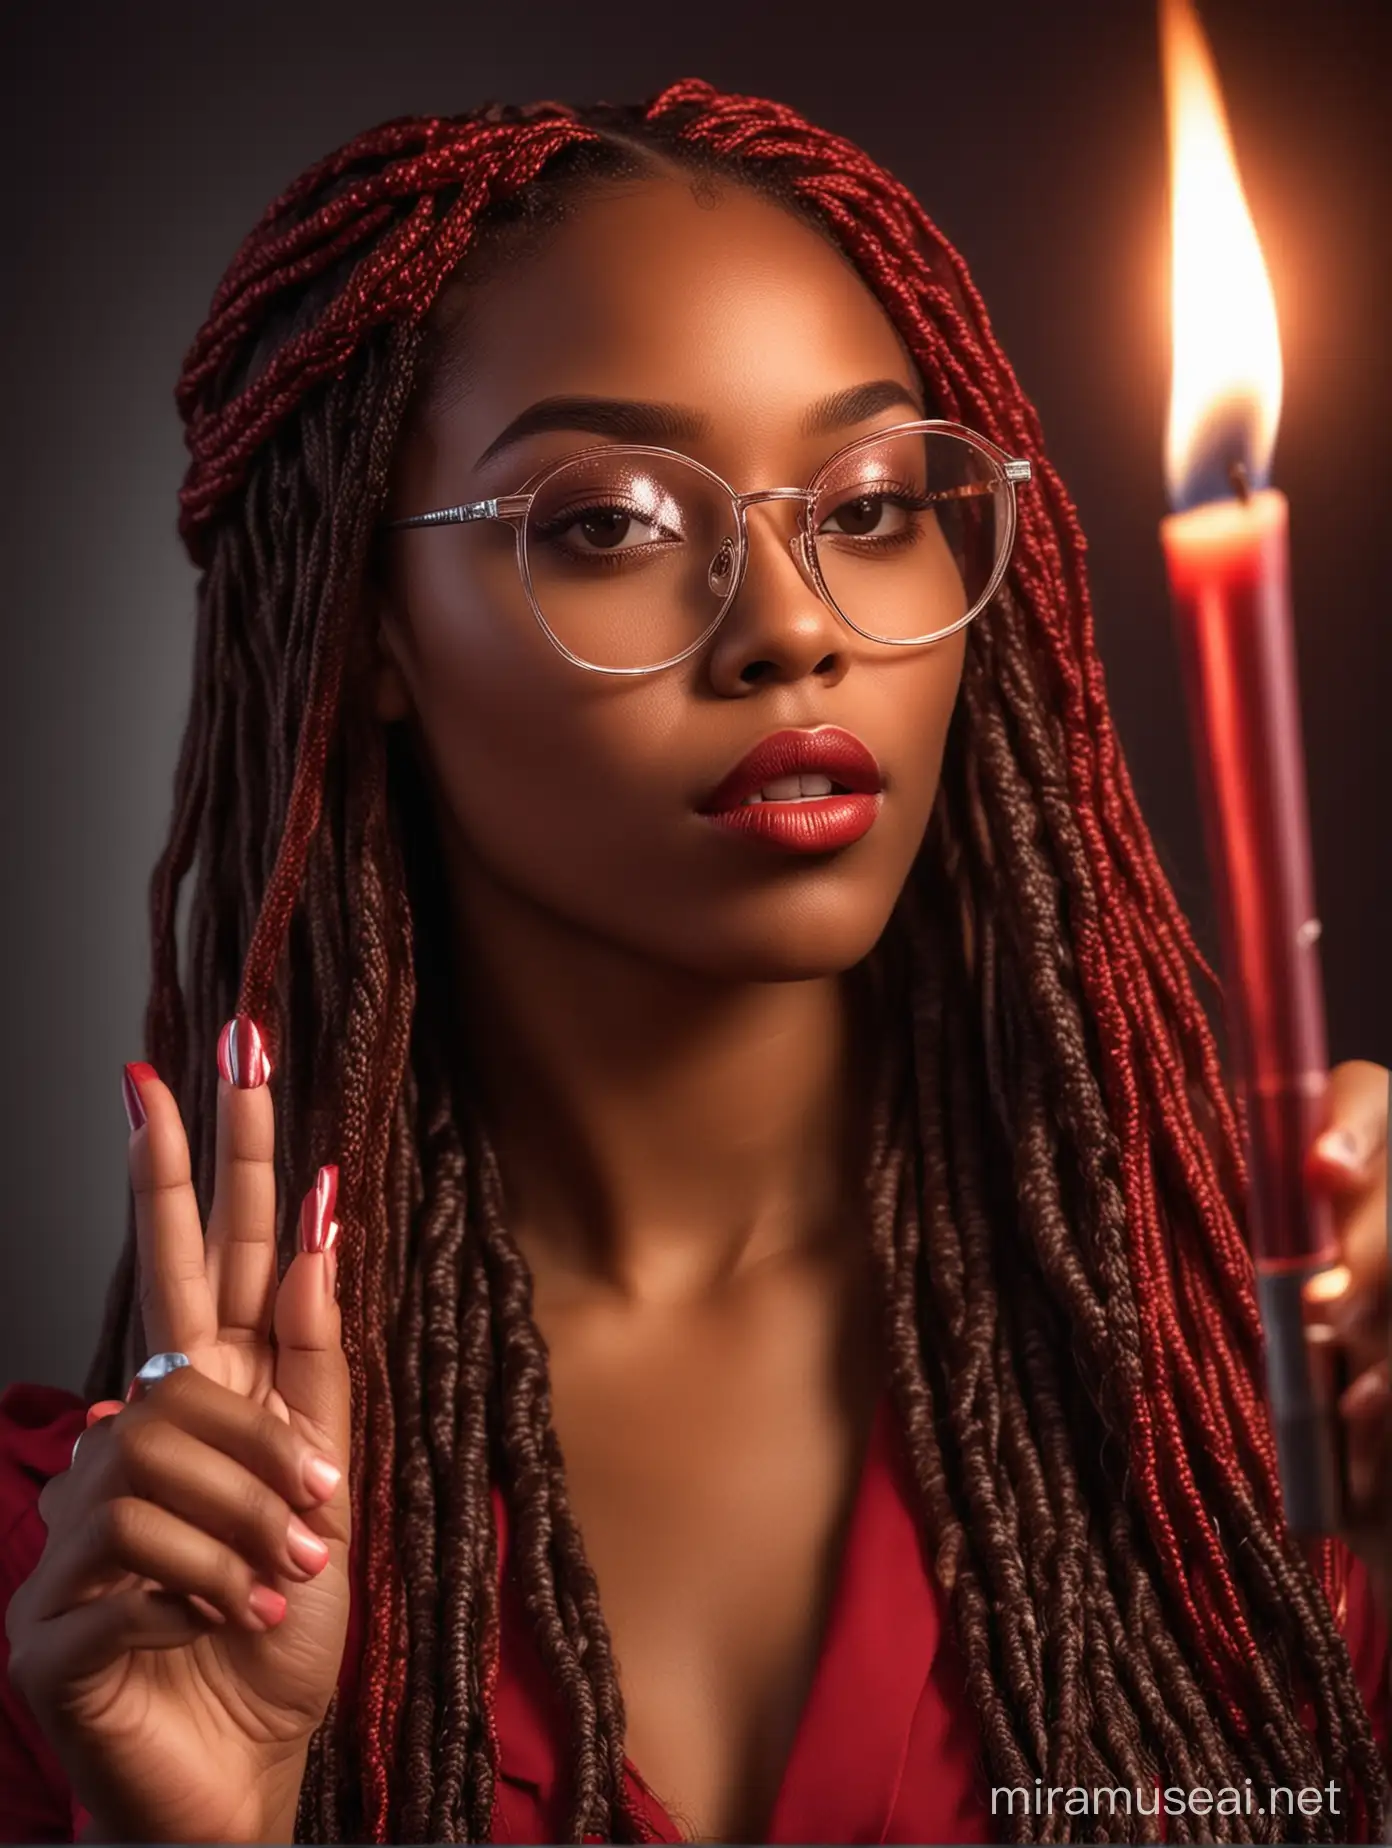 African American Woman with Red Braids Lighting a Flame